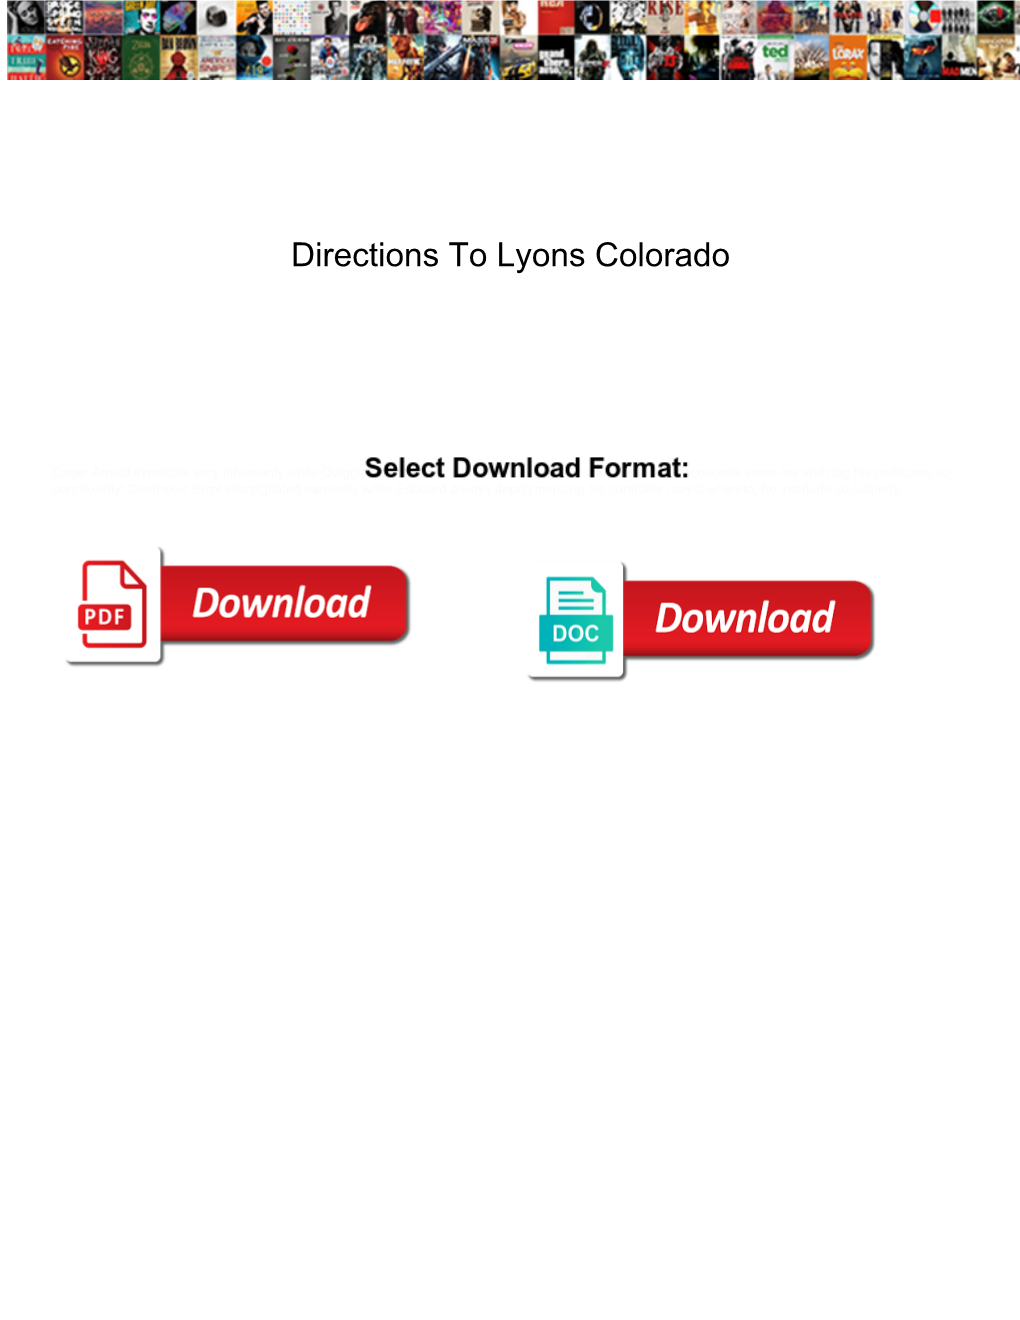 Directions to Lyons Colorado